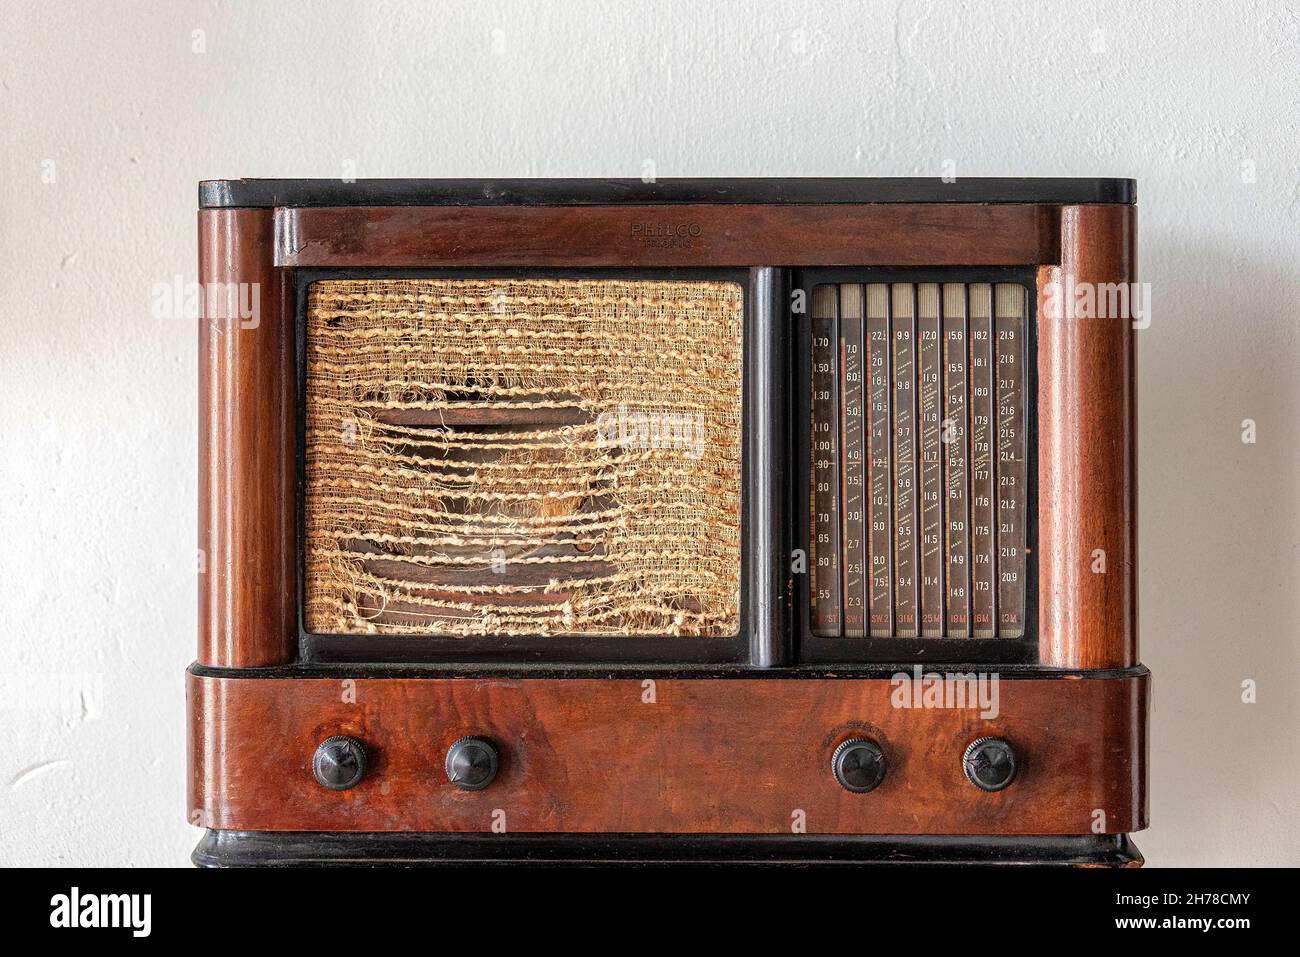 Antique old radio inside of the Consistorial House Museum which is known as  La Periquera. Nov. 21, 2021 Stock Photo - Alamy